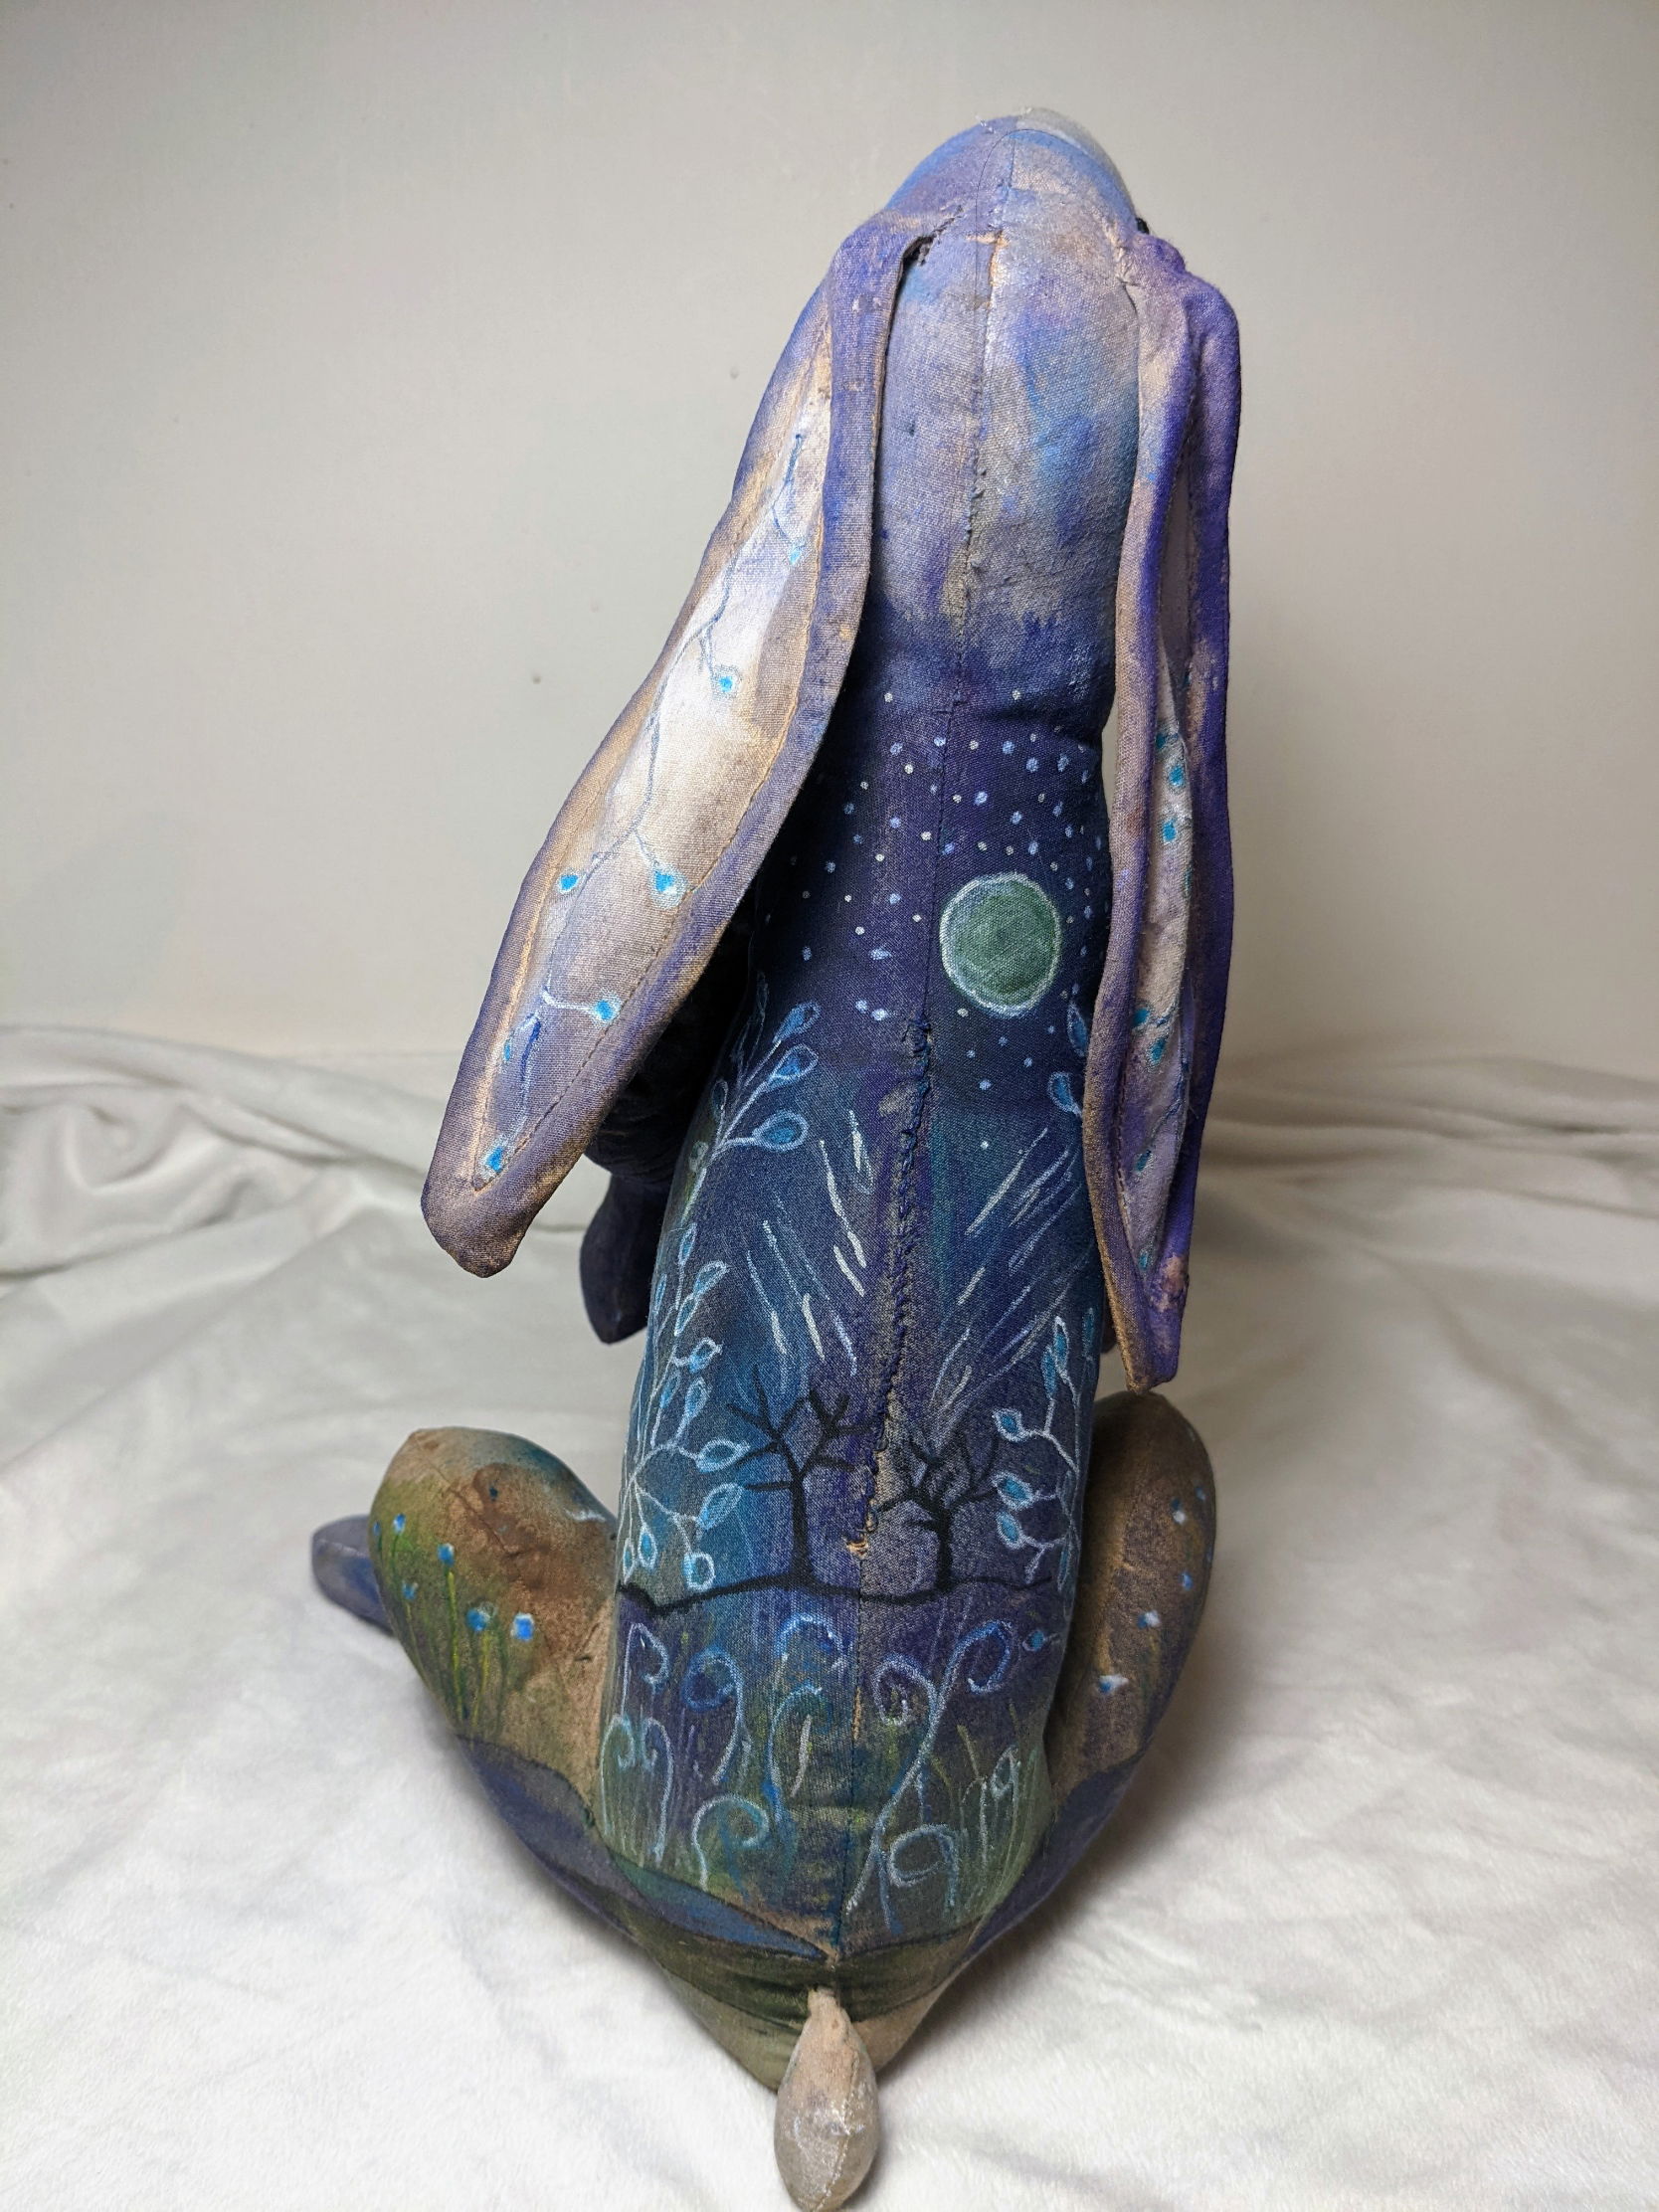 Little vlue hare textile sculpture with a leaves and the moon on its back